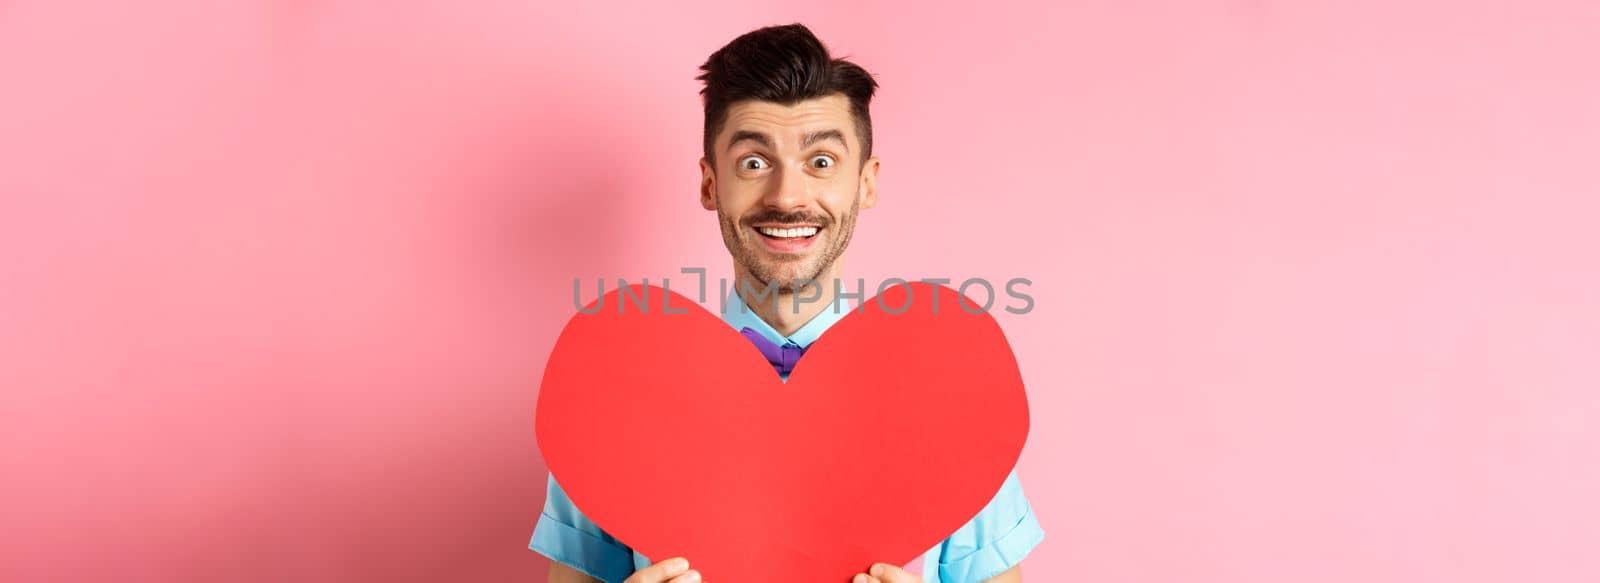 Hopeful man in love showing red heart sign, smiling at camera, waiting for soulmate on Valentines day, standing on pink background.